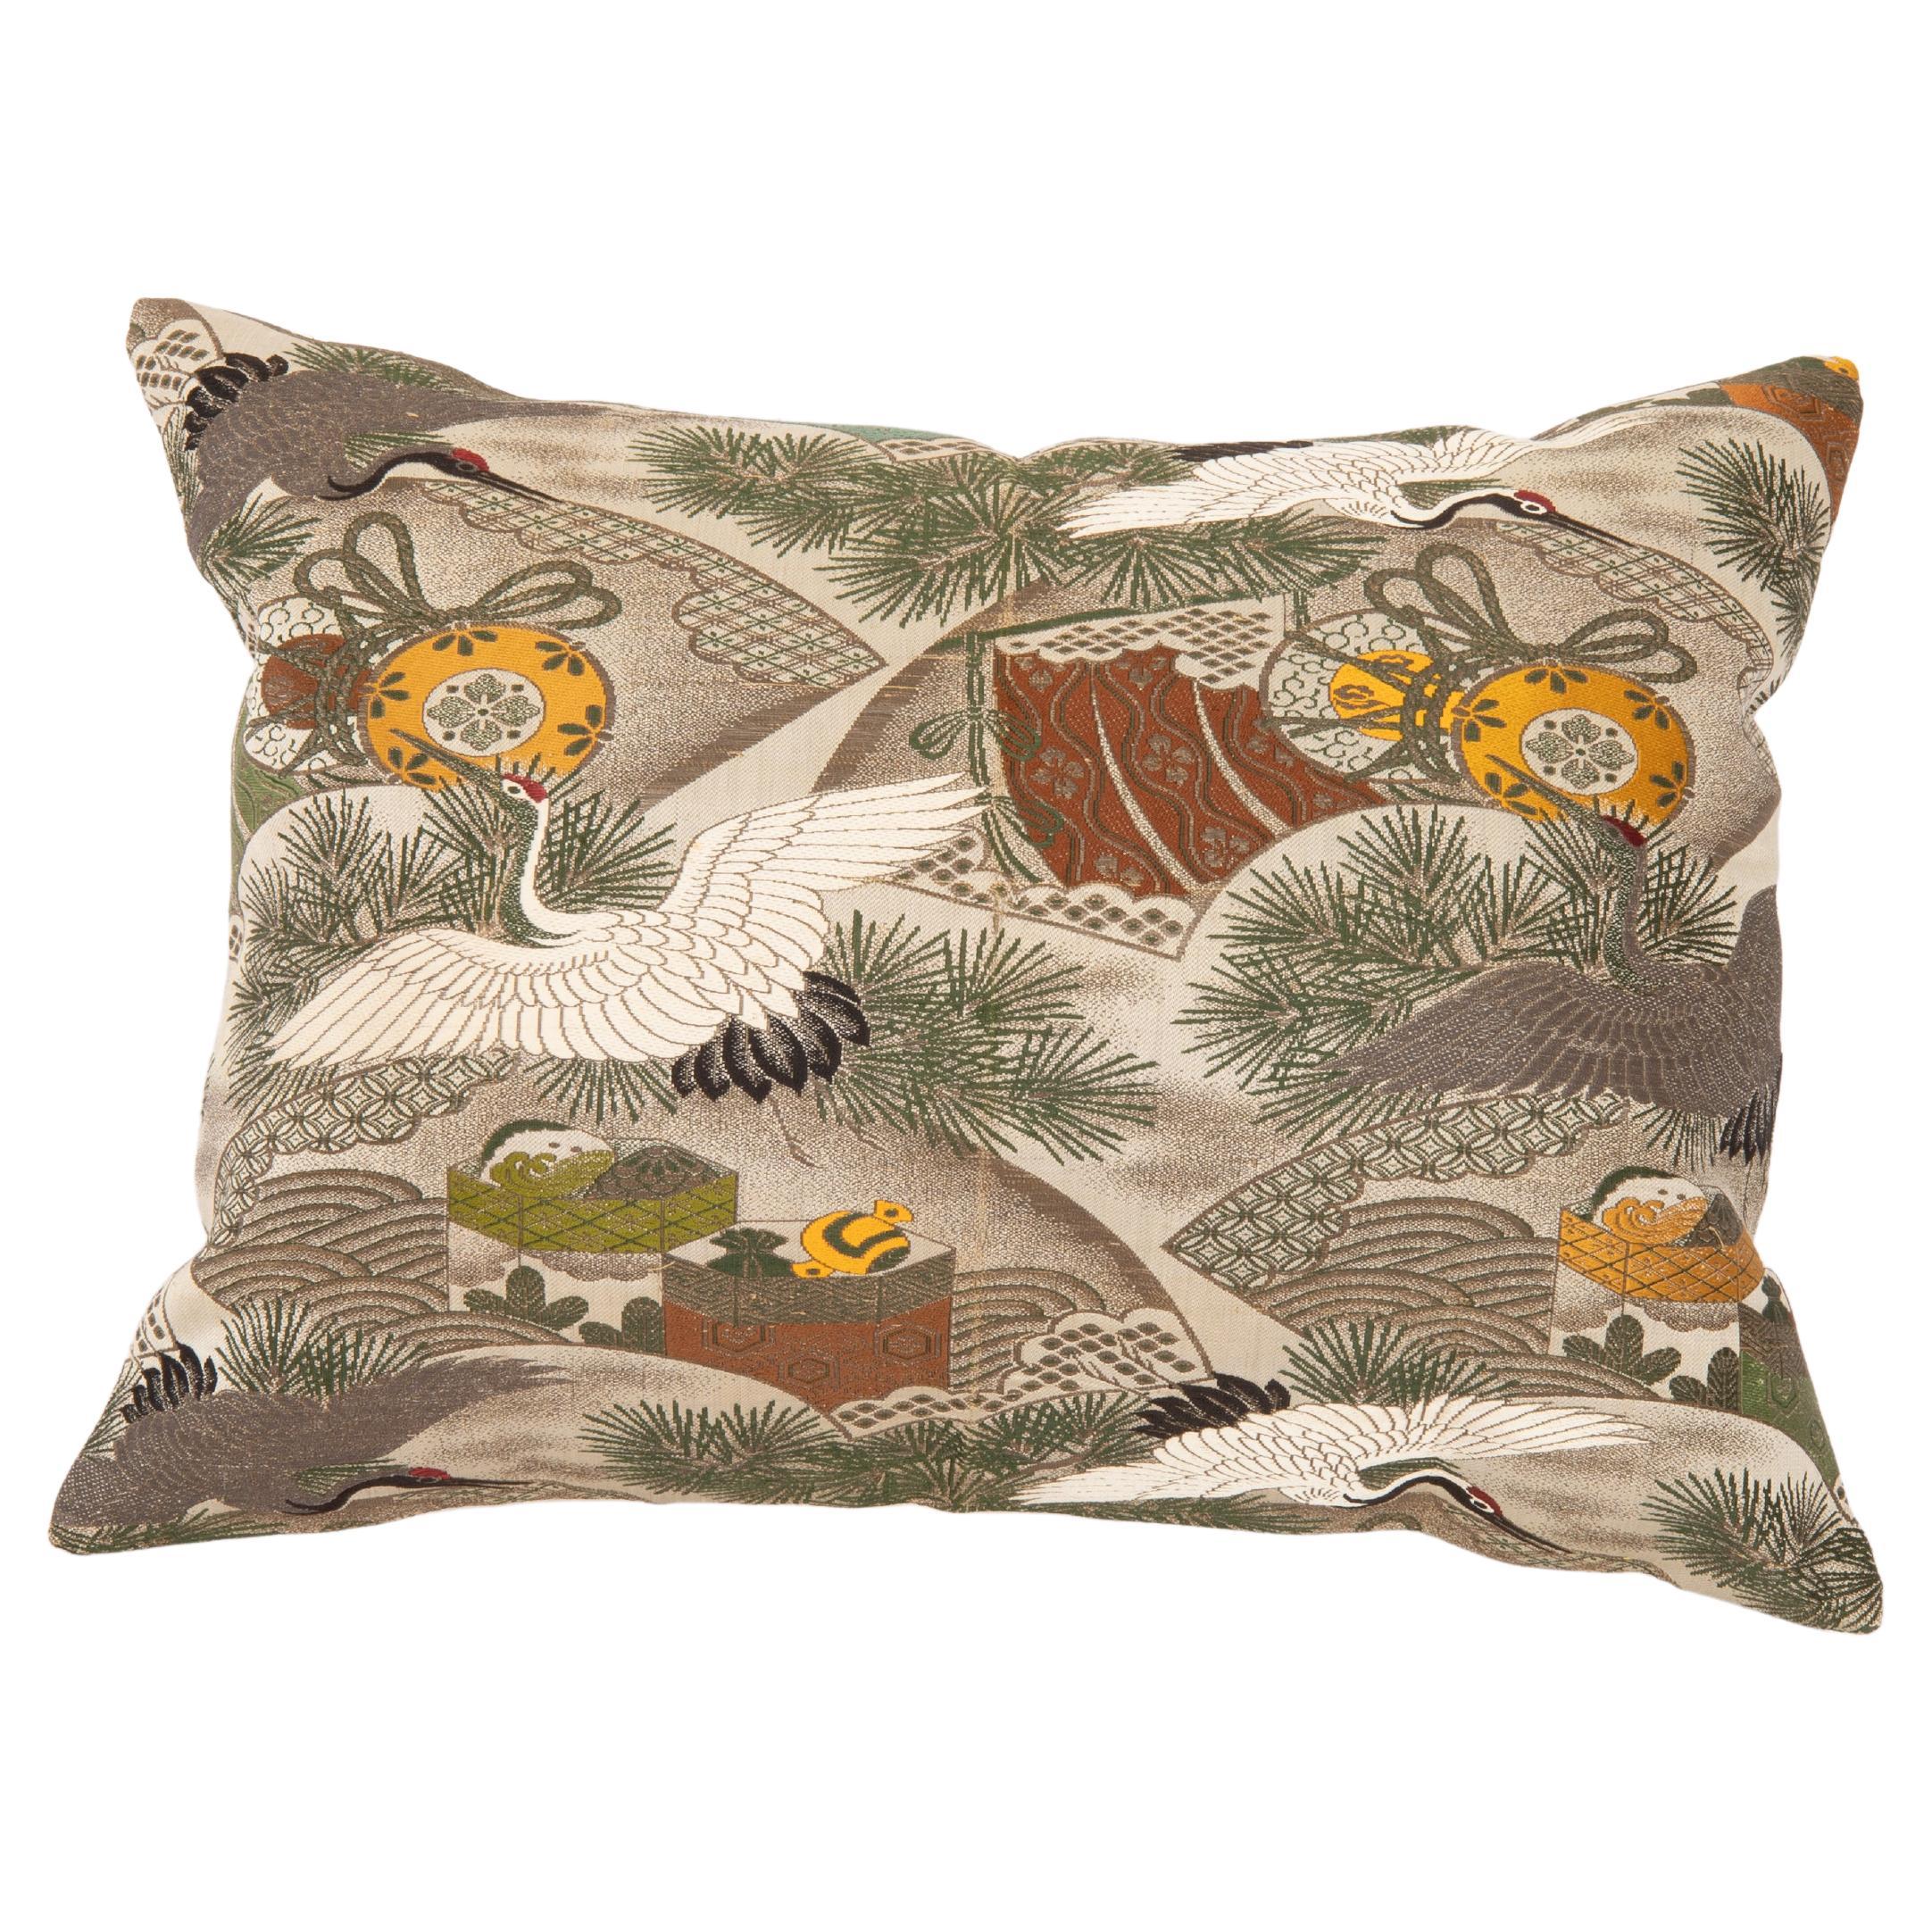 Pillow Cover Made from a Vintage Obi, Japan